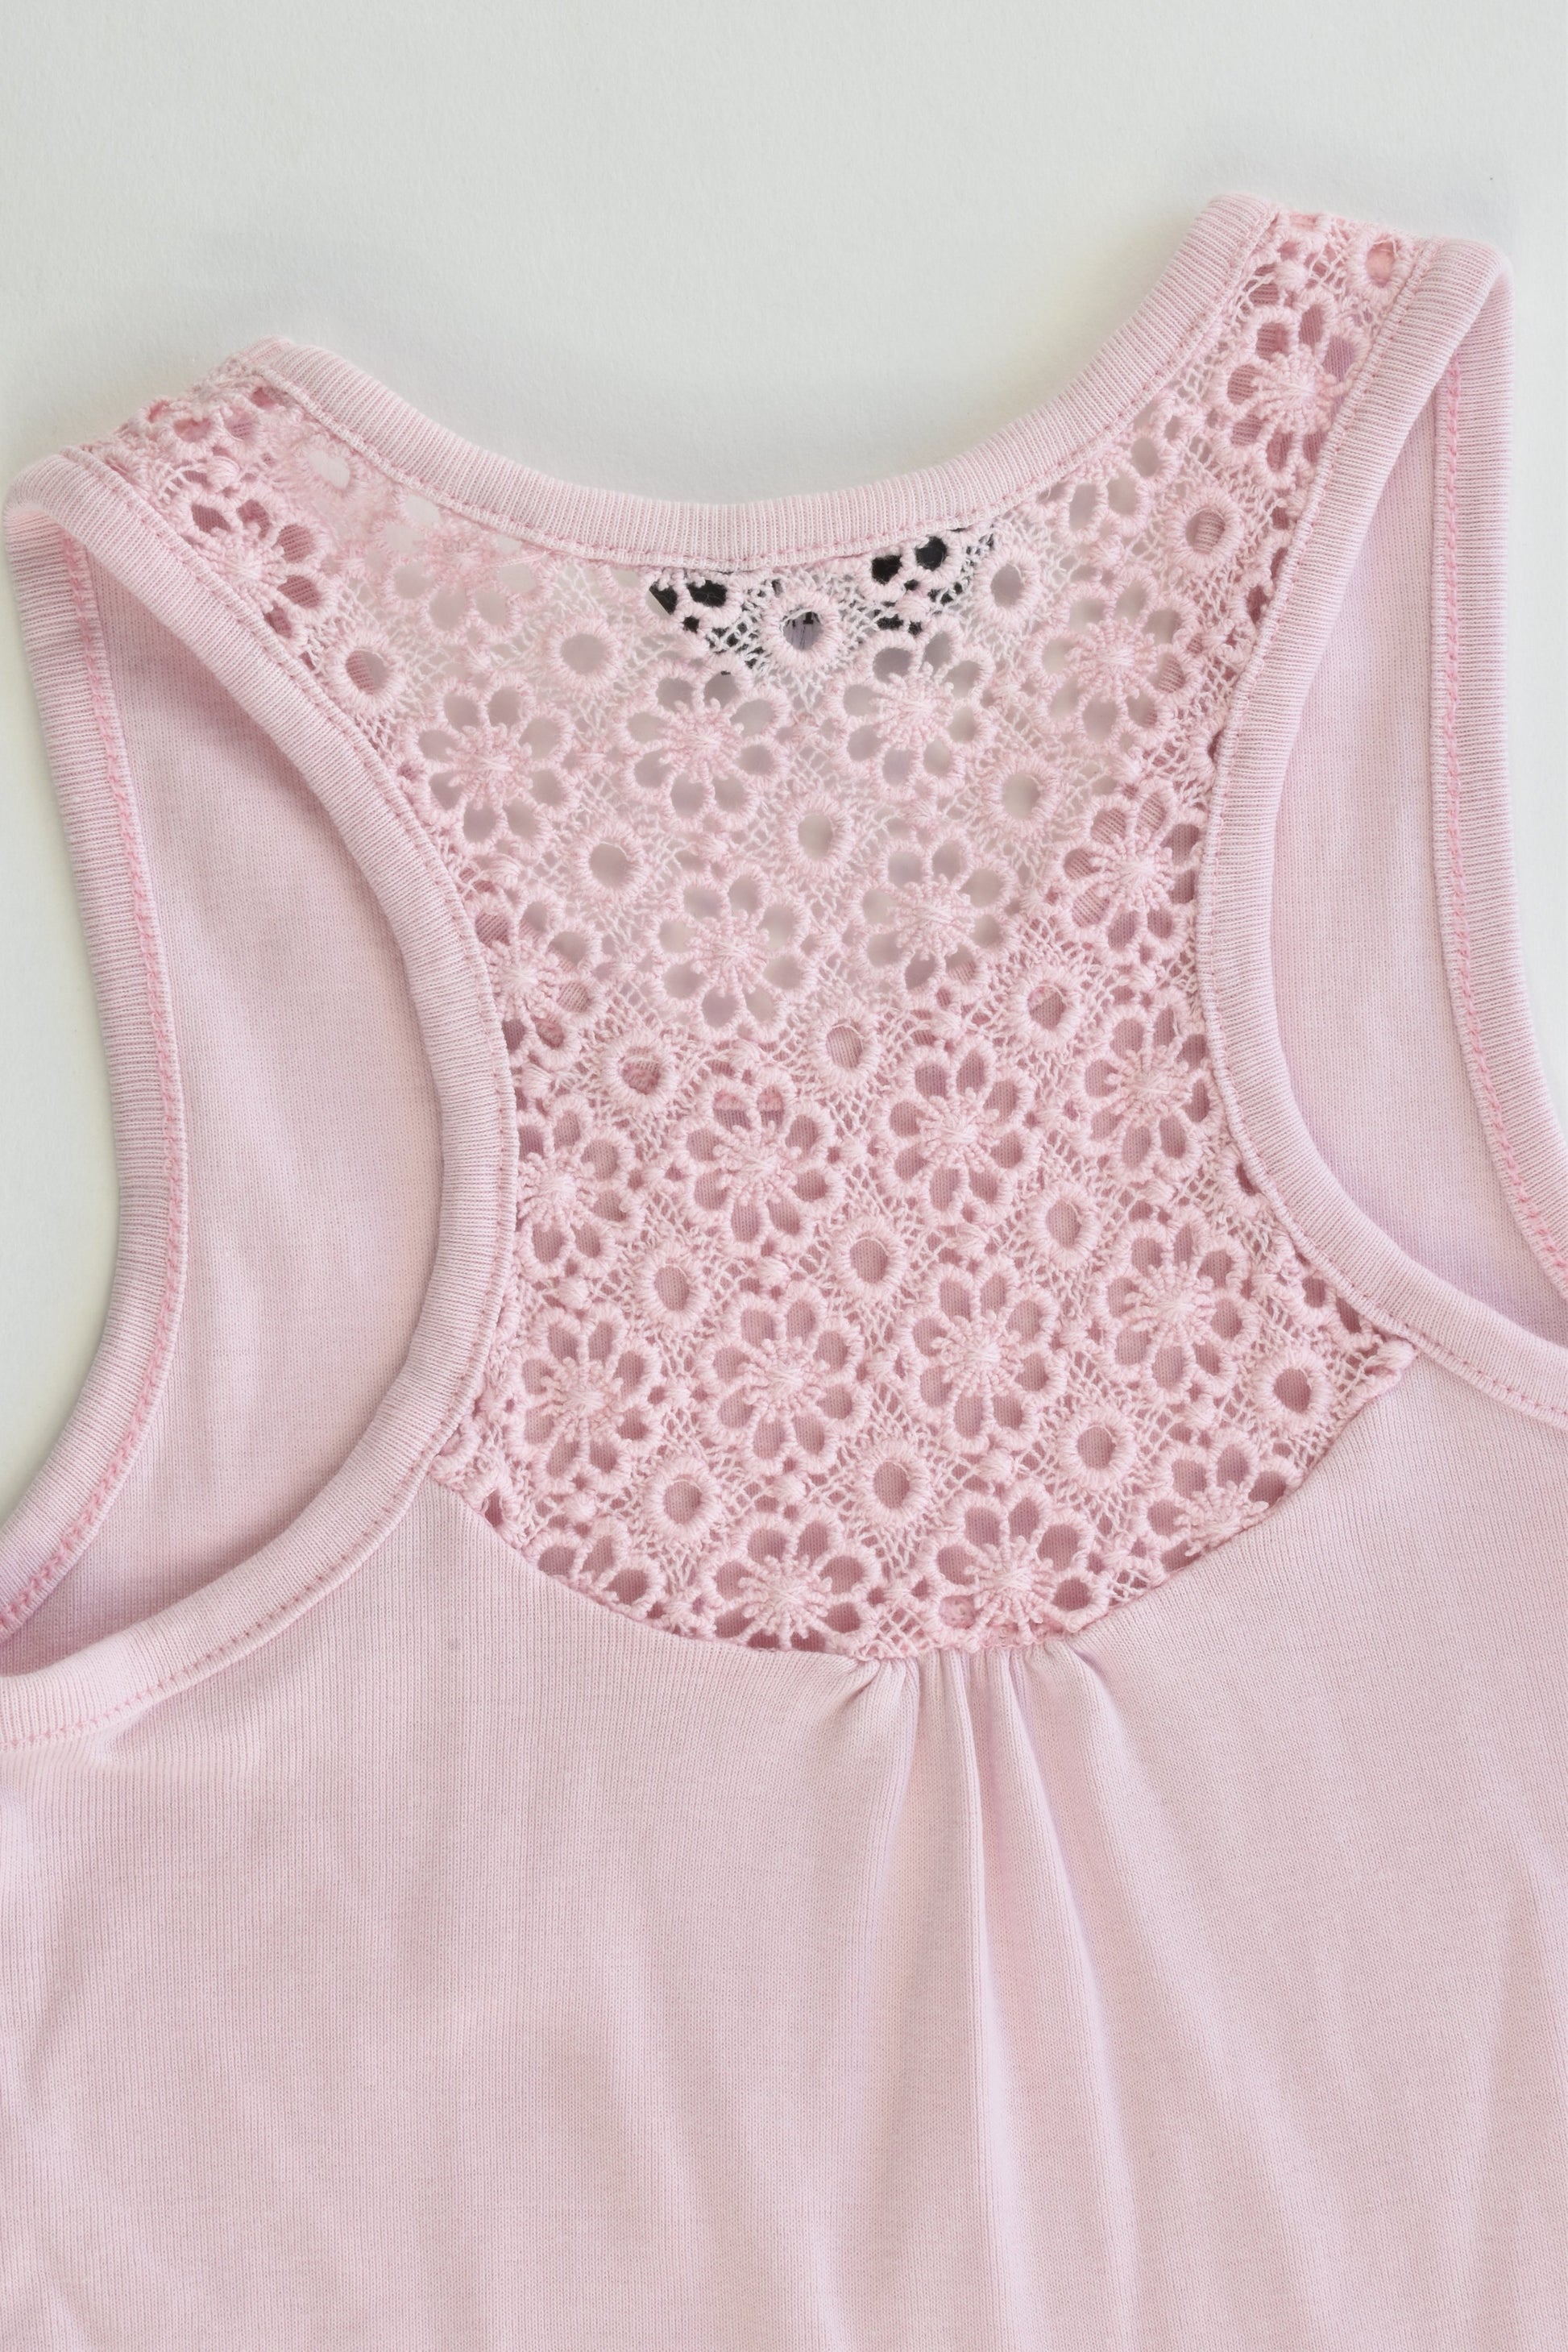 George Size 6 Tank Top with Lace Detail